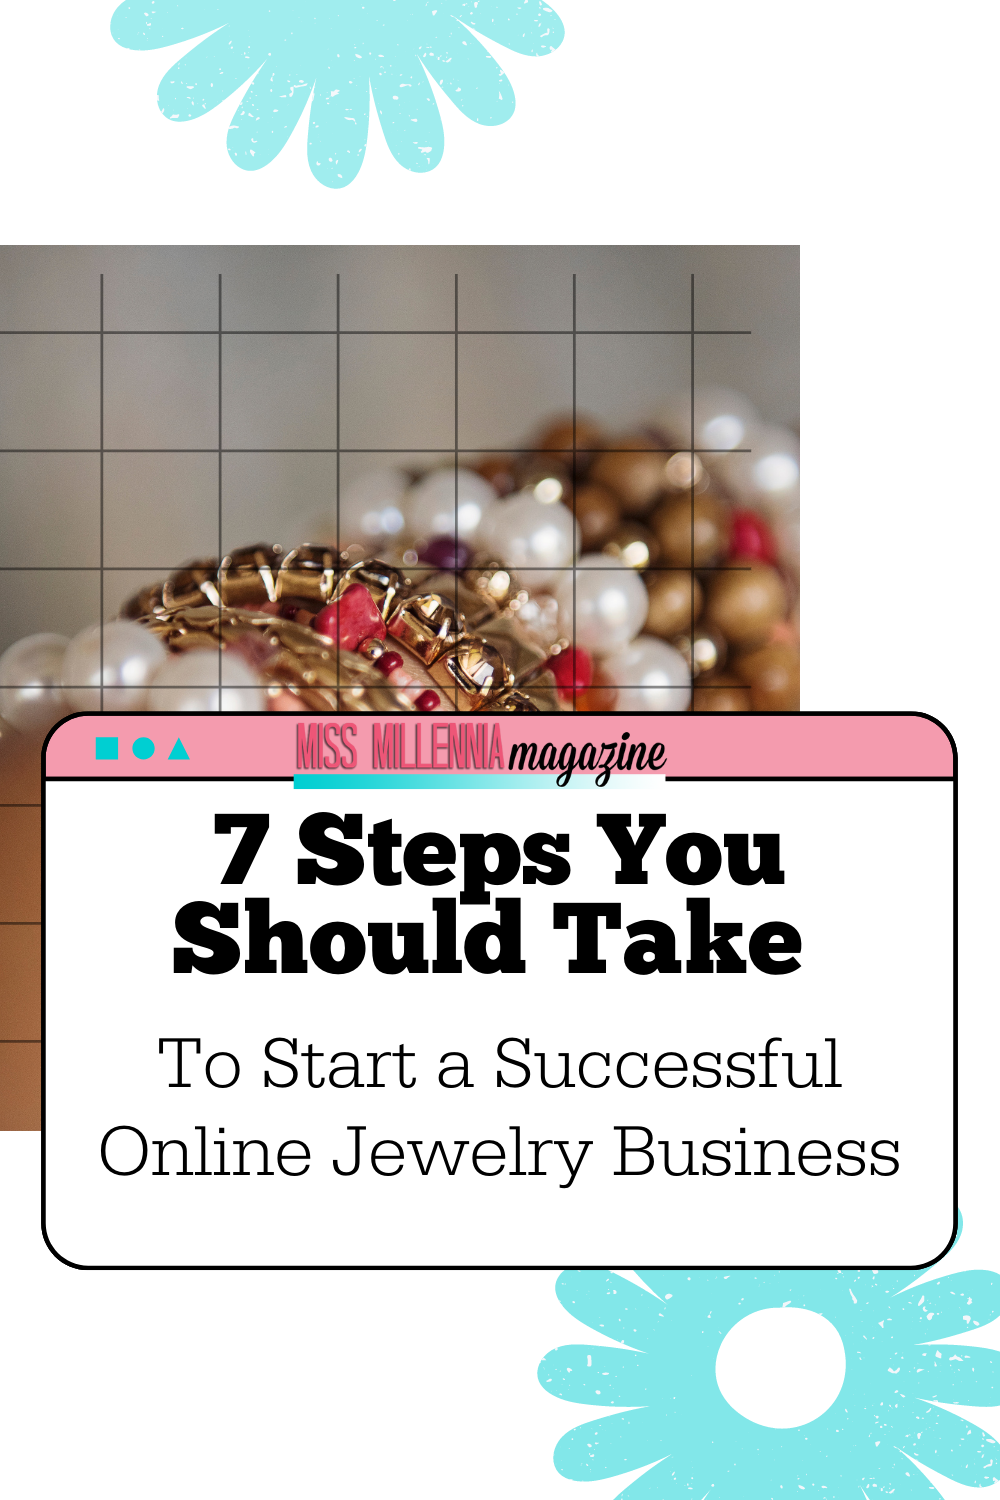 7 Steps You Should Take To Start a Successful Online Jewelry Business